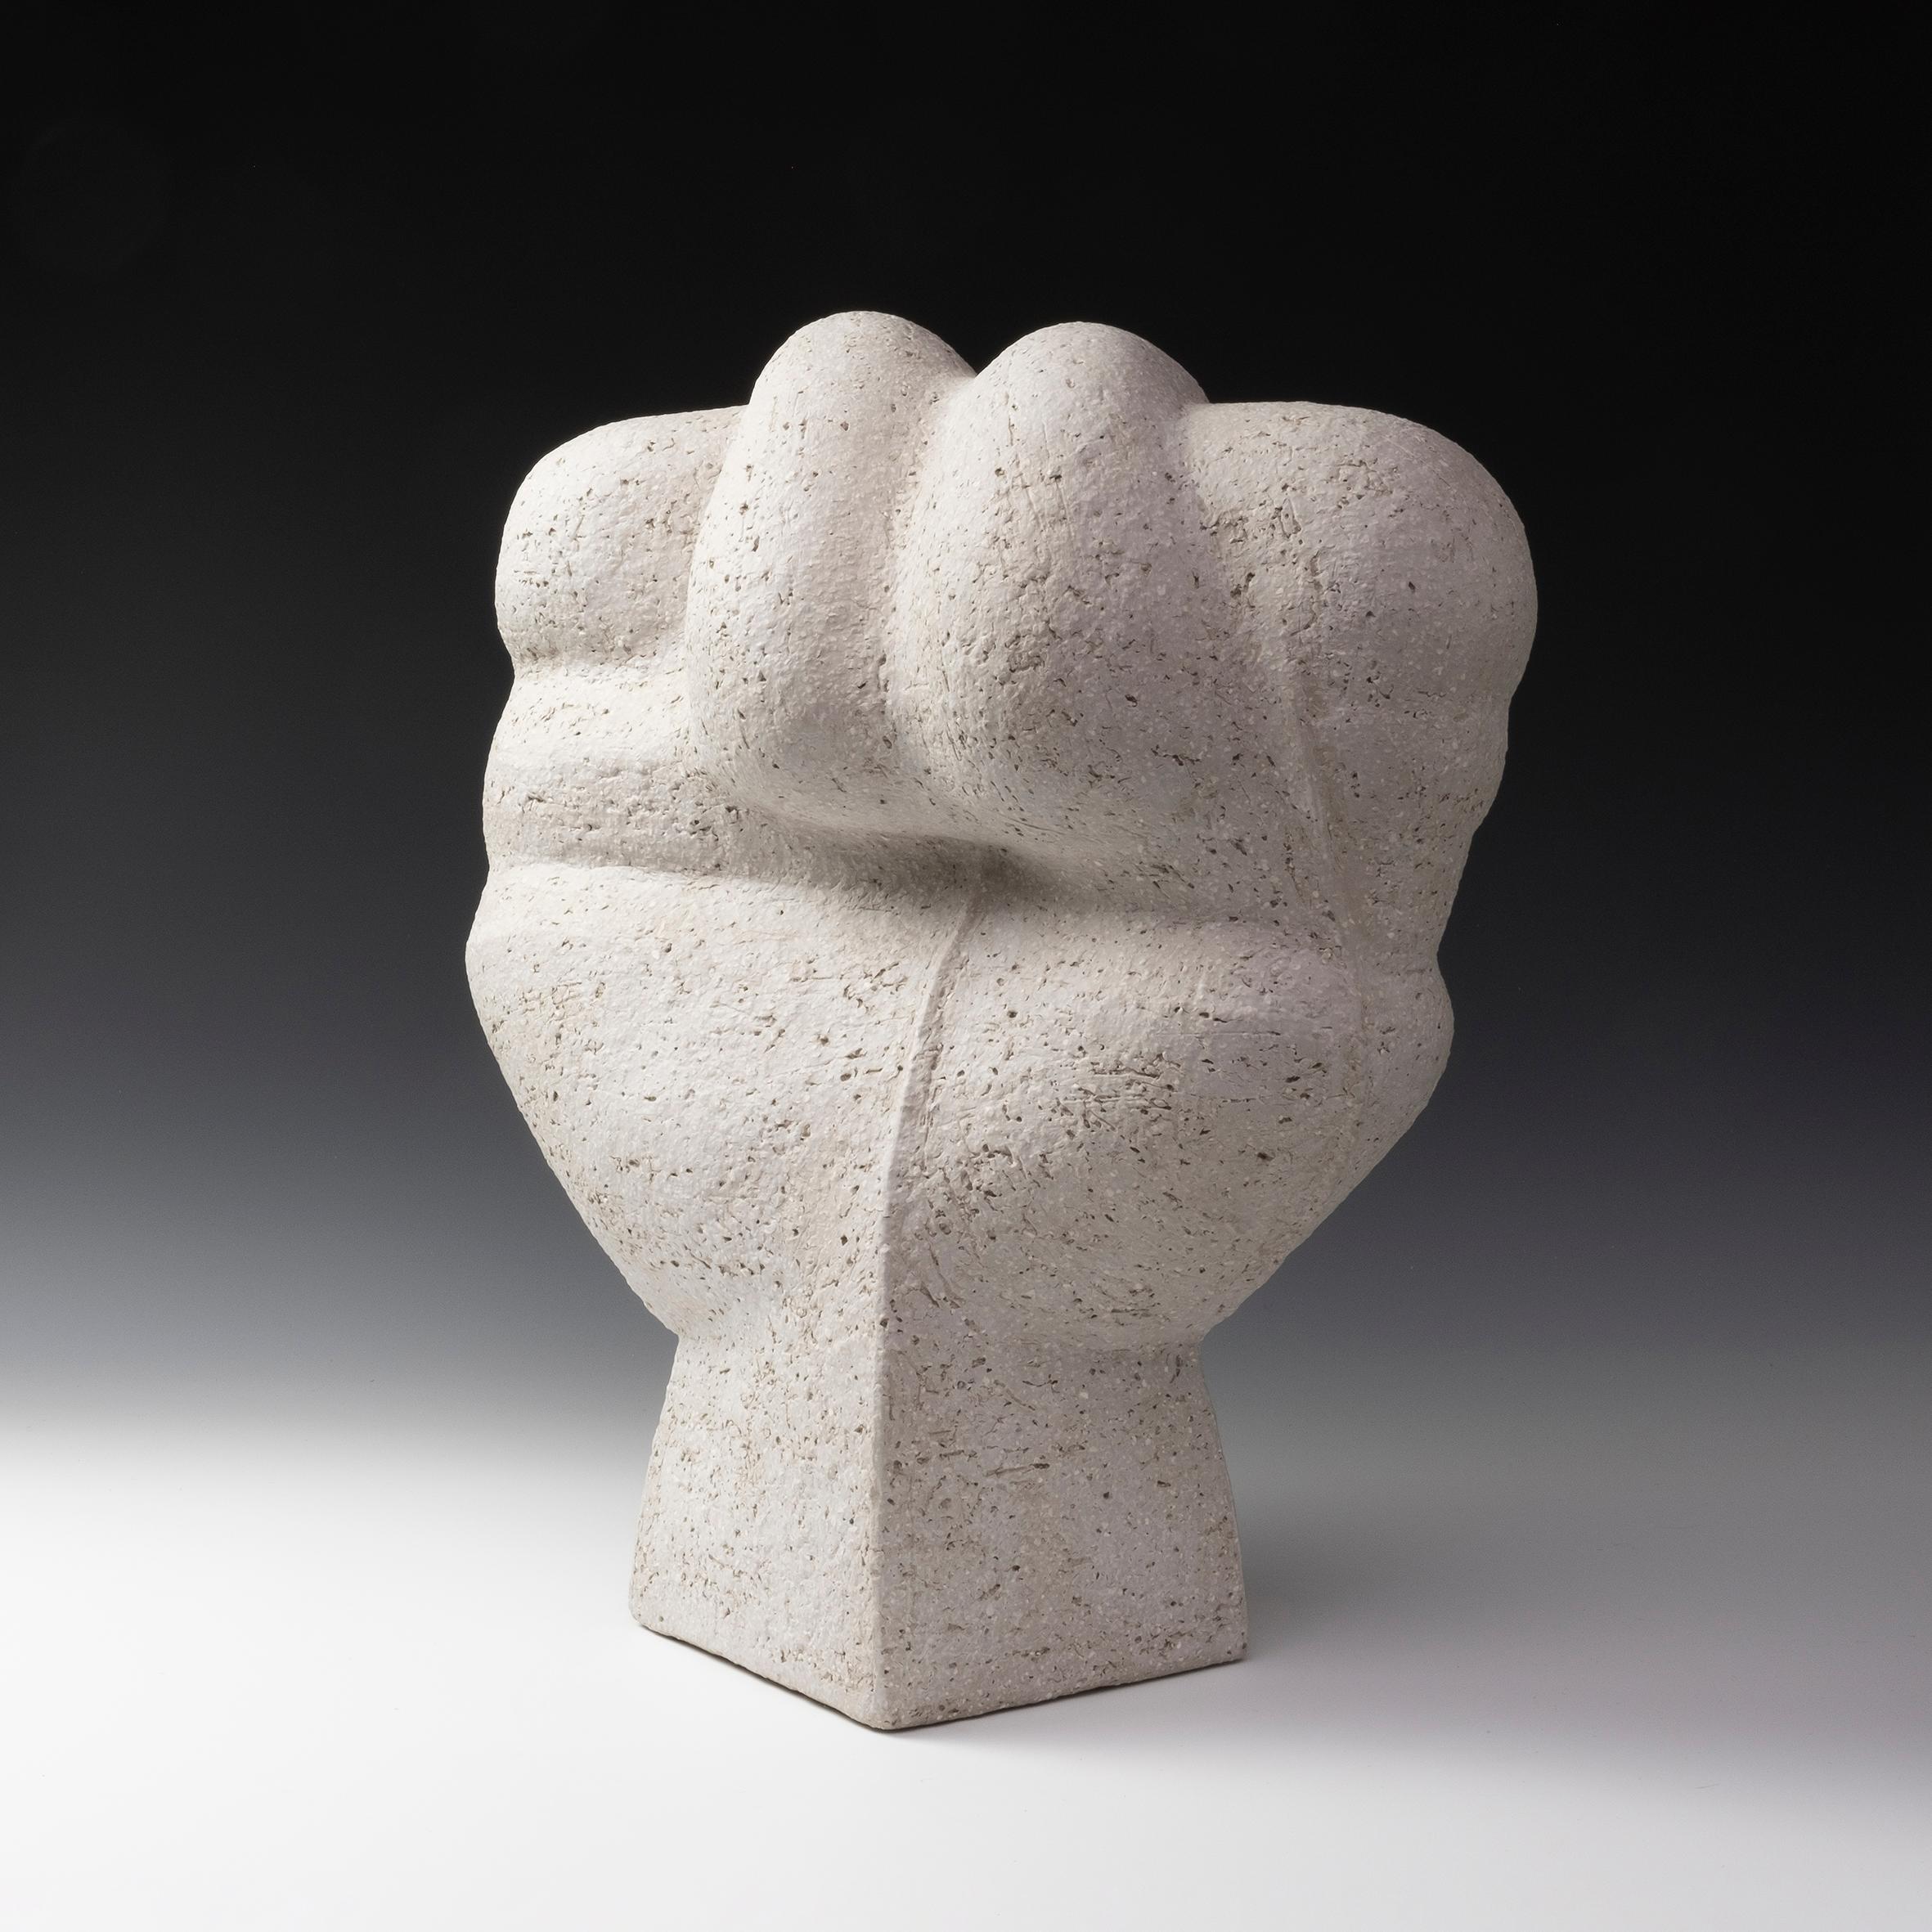 The intuitive result of an educated dancer, choreographer and large-scale ceramicist transferring his love for the human body into clay. With extensive studies during the mid 70’s in both Stockholm and New York, Bo Arenander (b. 1954) has over 40